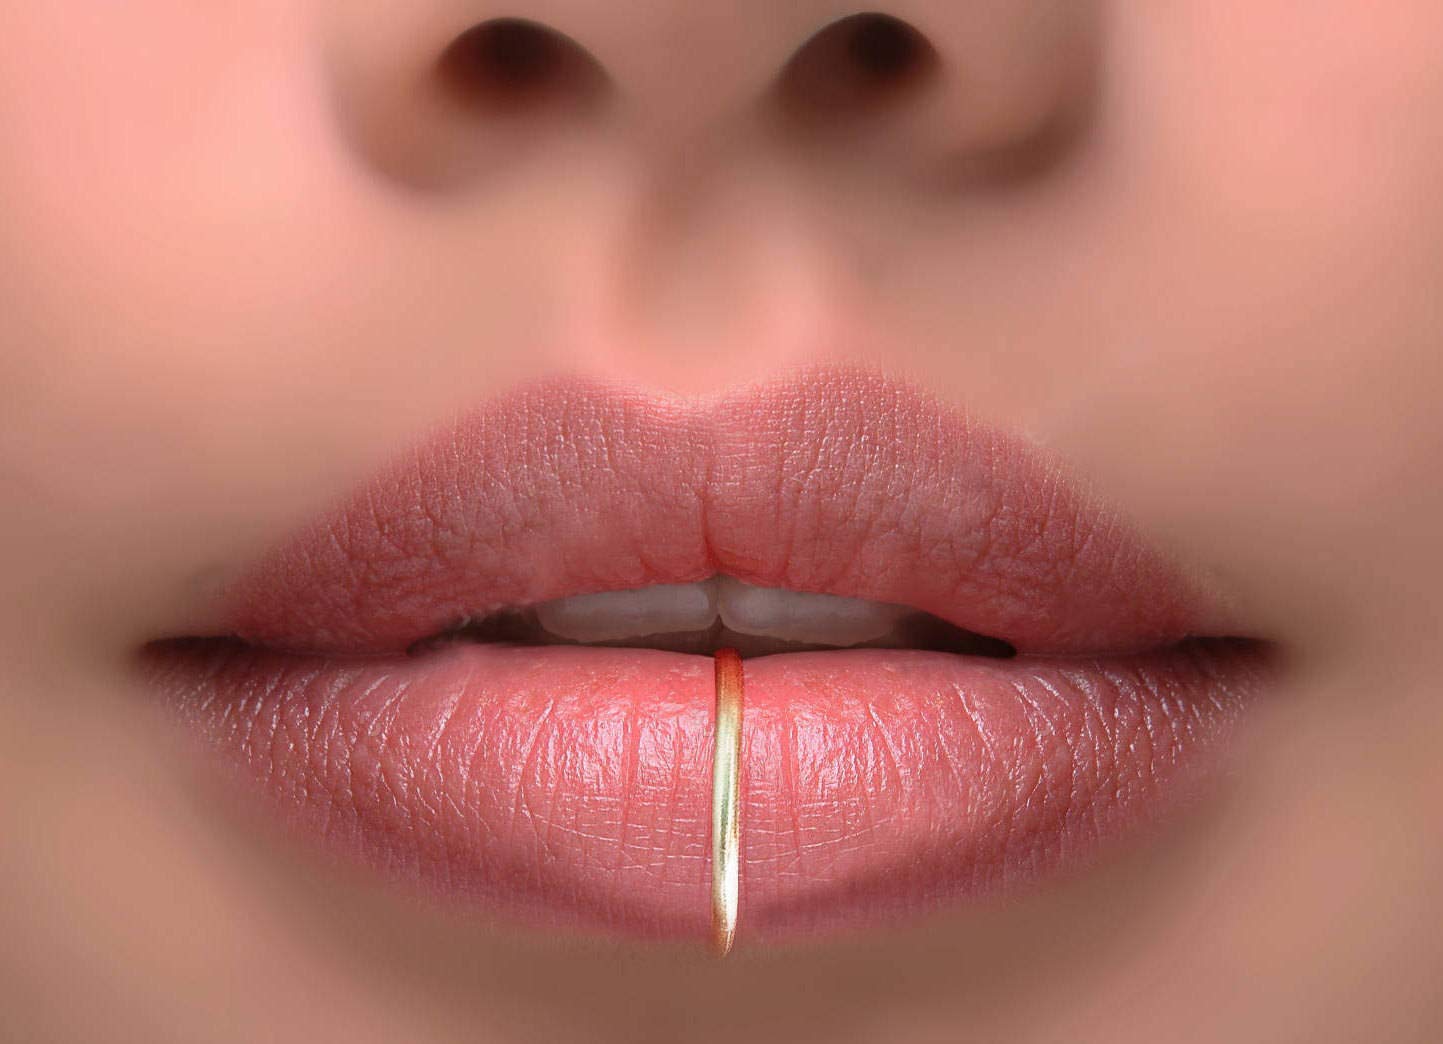 How to Make a Fake Lip Ring: 8 Steps (with Pictures) - wikiHow